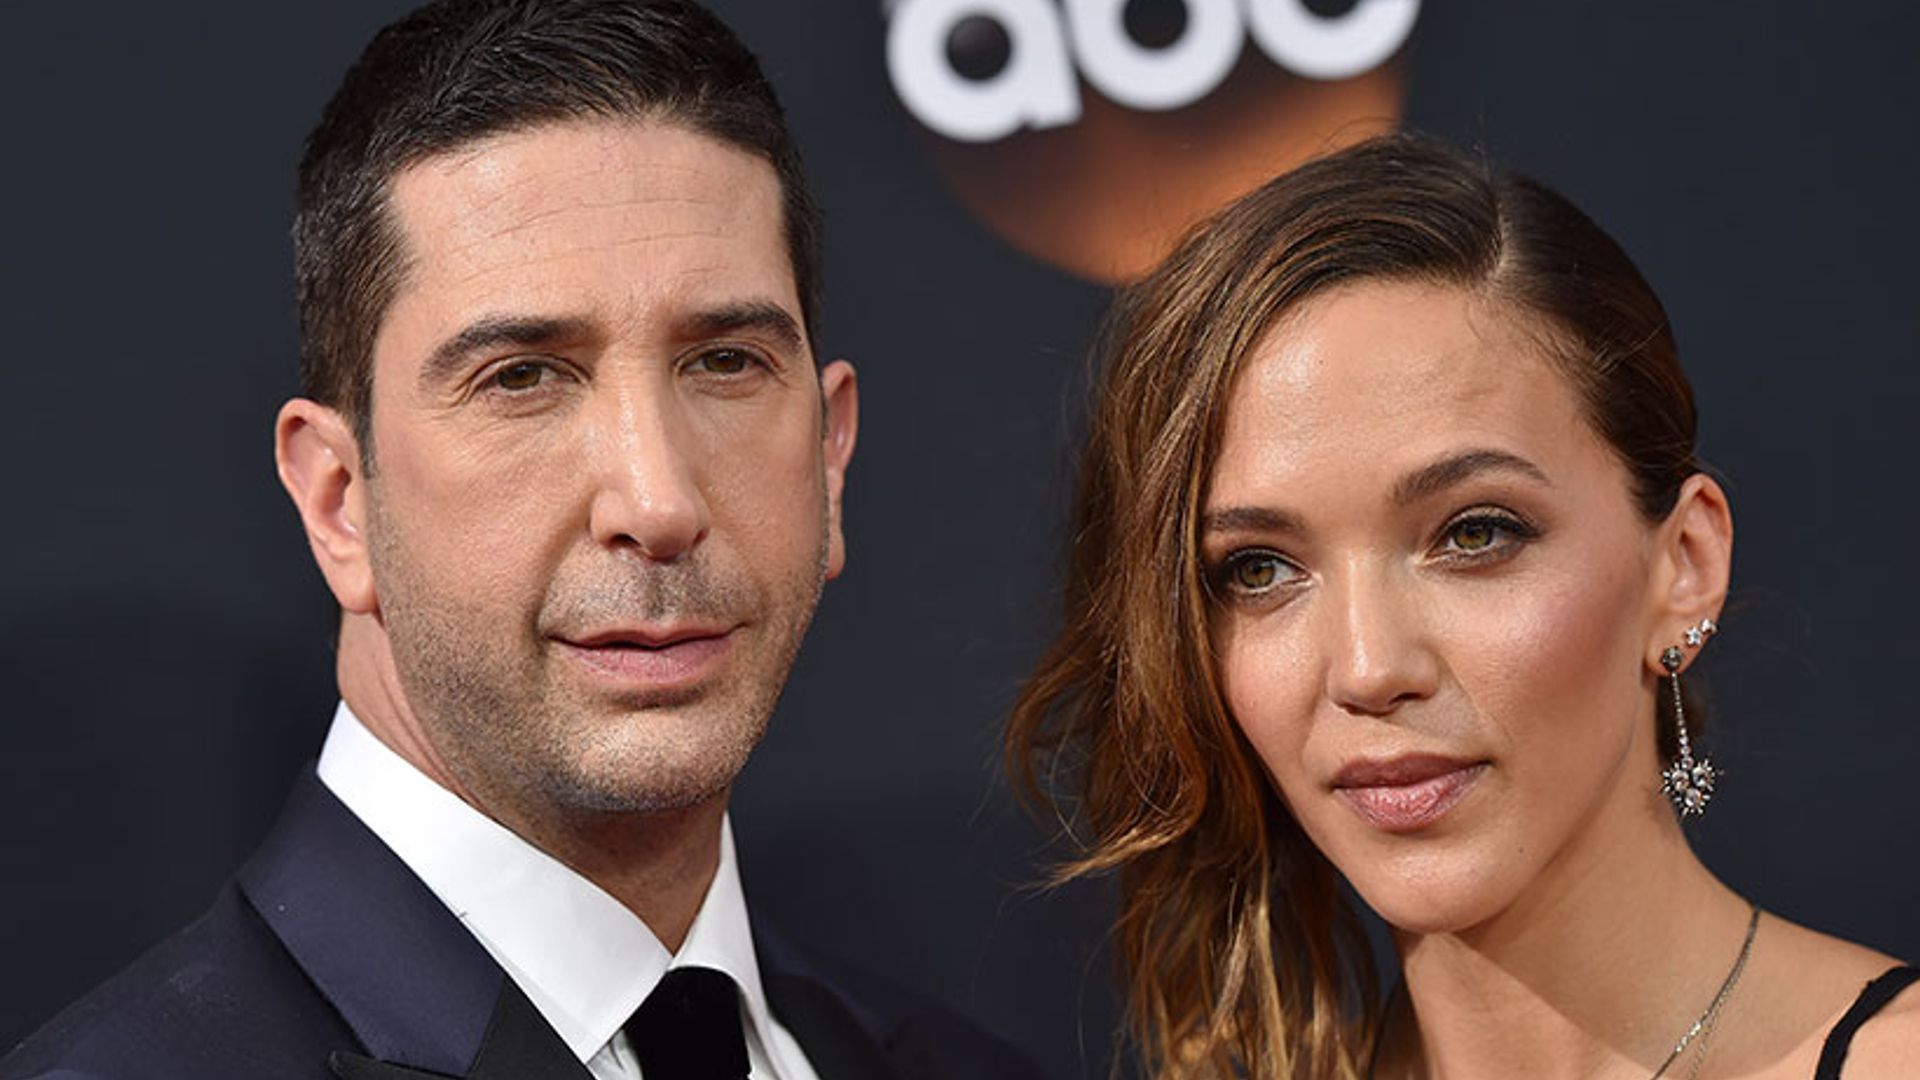 David Schwimmer confirms he and wife Zoe Buckman are on a break